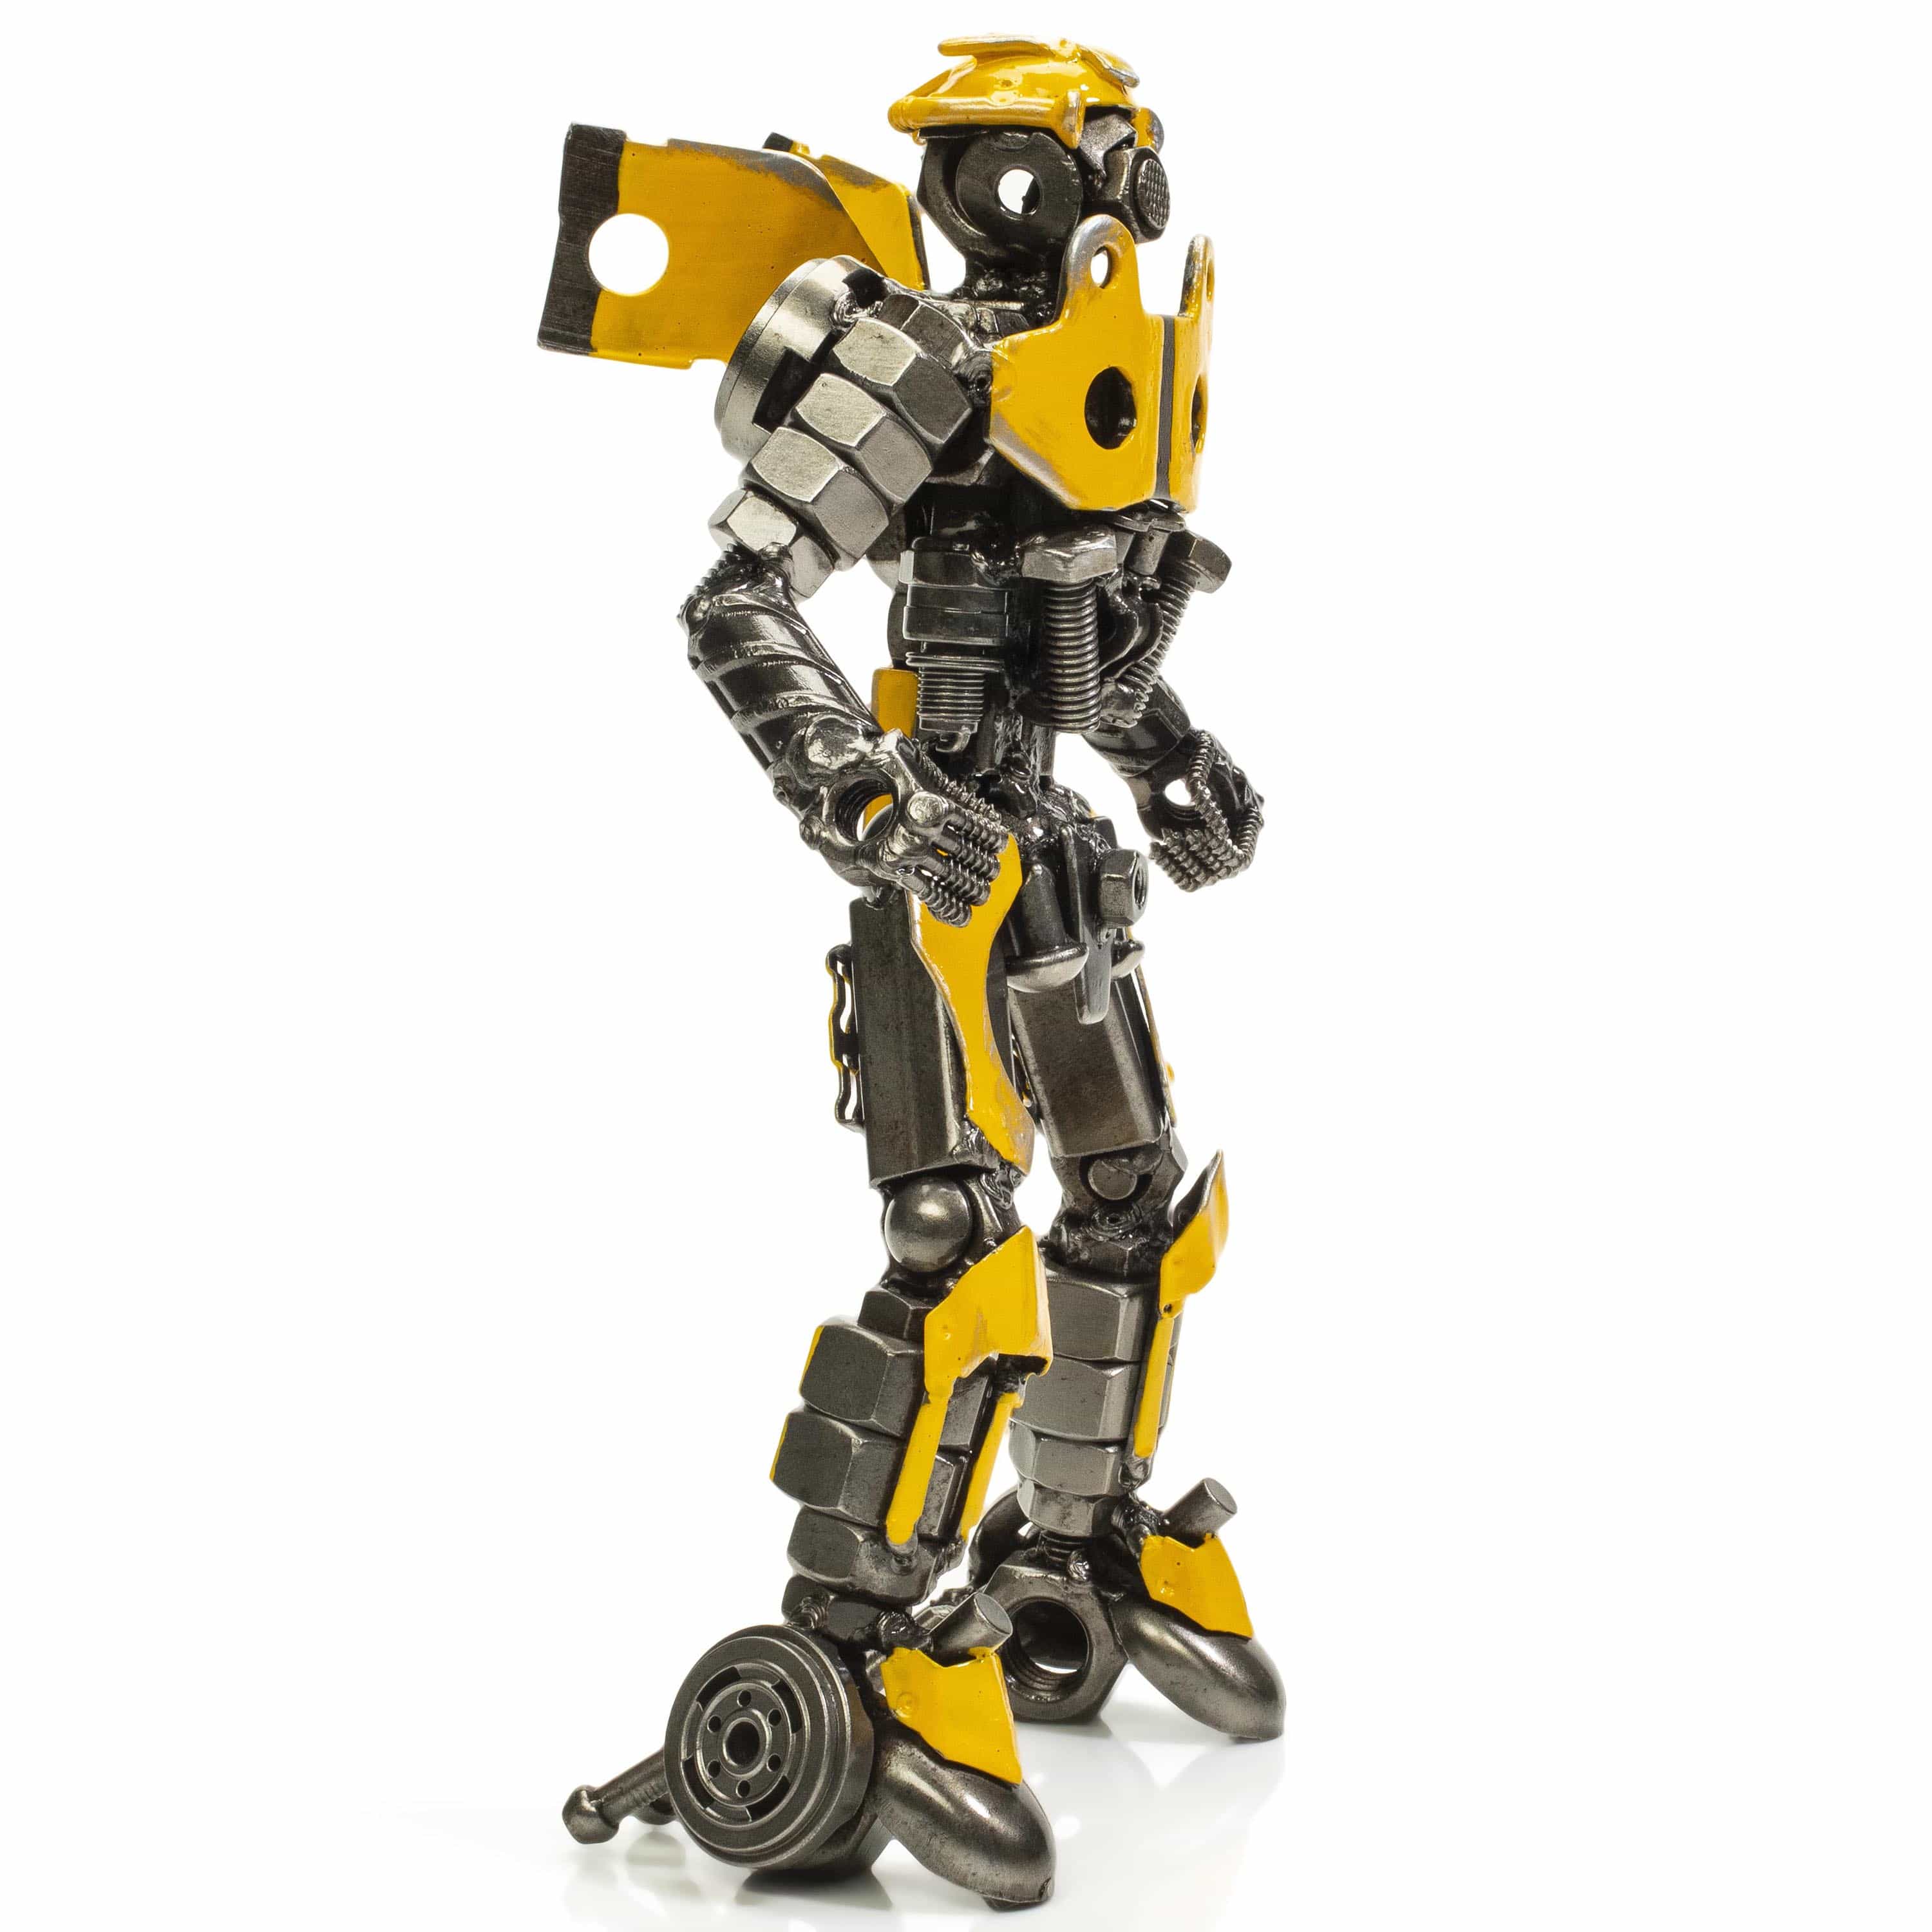 Kalifano Recycled Metal Art BumbleBee Inspired Recycled Metal Sculpture RMS-700BBA-N